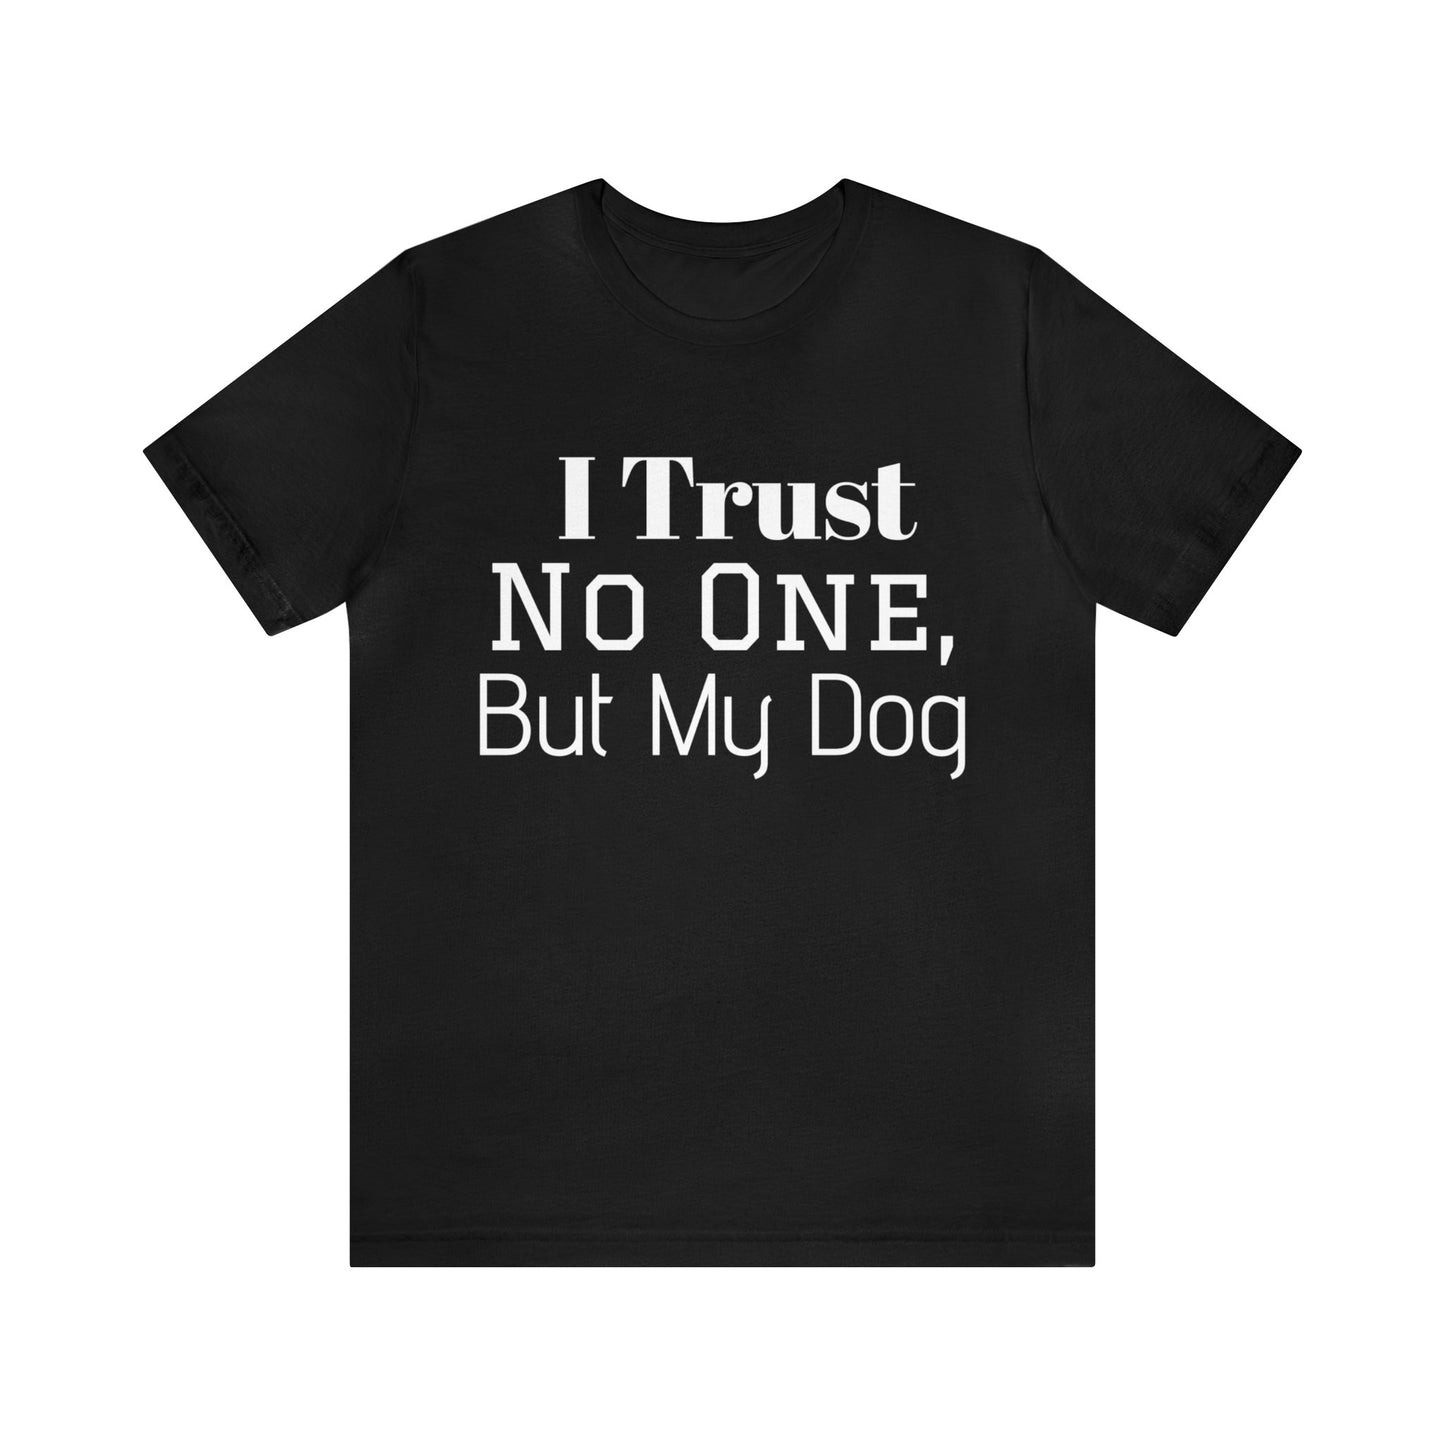 Bold Statement Canine Casual Wear Companionship Cotton Dog Dog Bond Dog Lover Dog Owner Funny Furry Friend Gift Humor Humorous Loyalty Pet Petrova Designs Relaxed Fit T-shirts Trust Trustworthy Companion Unconditional Trust Unisex Witty